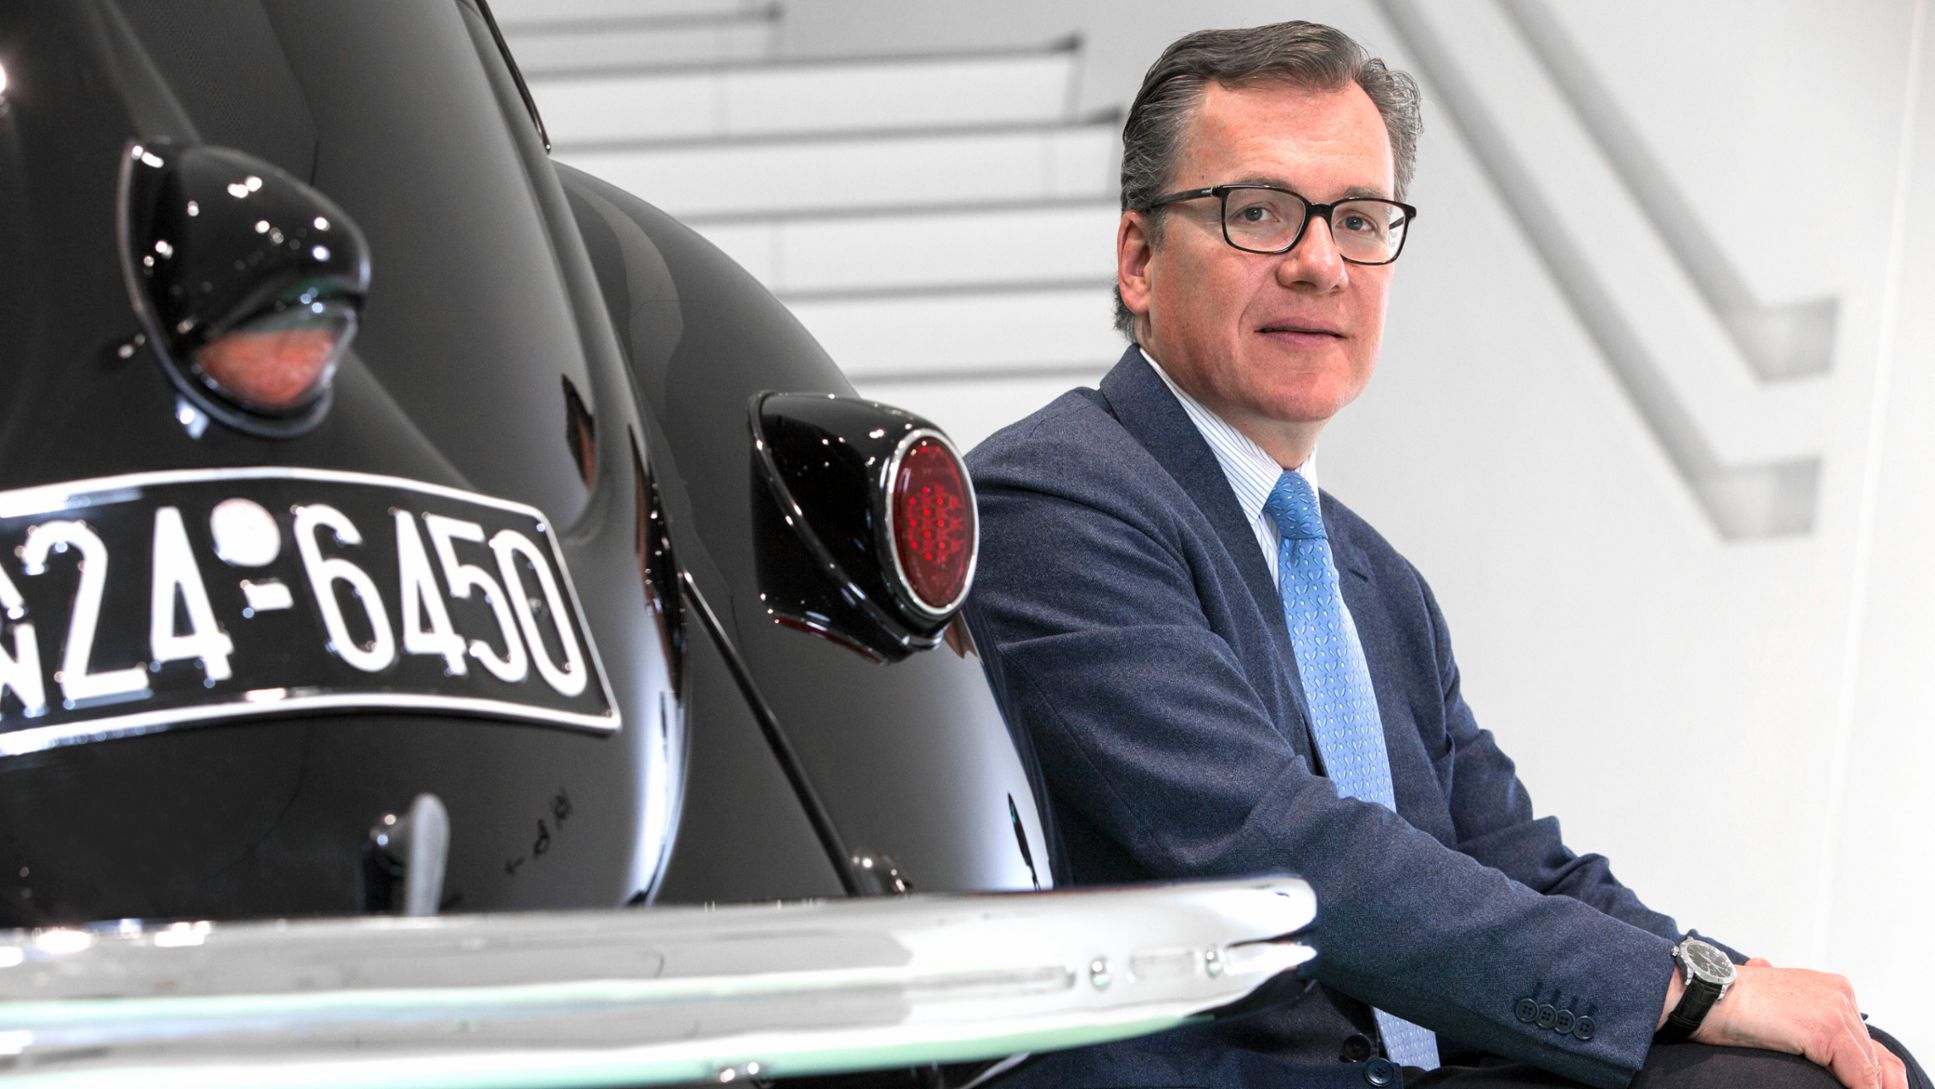 Marcus Baur, CEO of the Bocar Group, 2016, Porsche Consulting GmbH